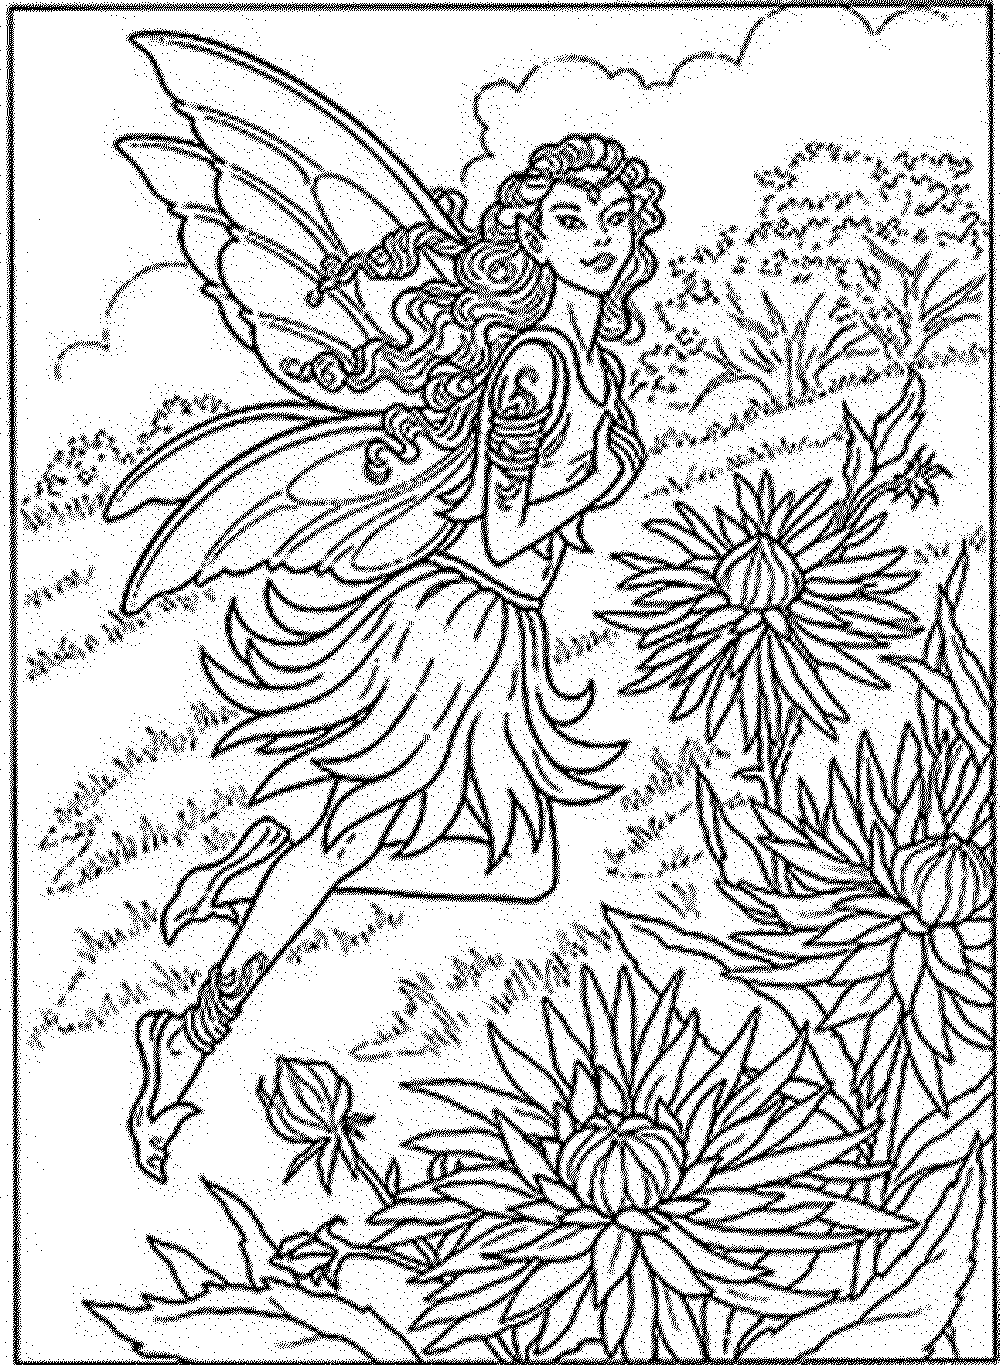 fairy coloring pages for adults - Printable Kids Colouring Pages